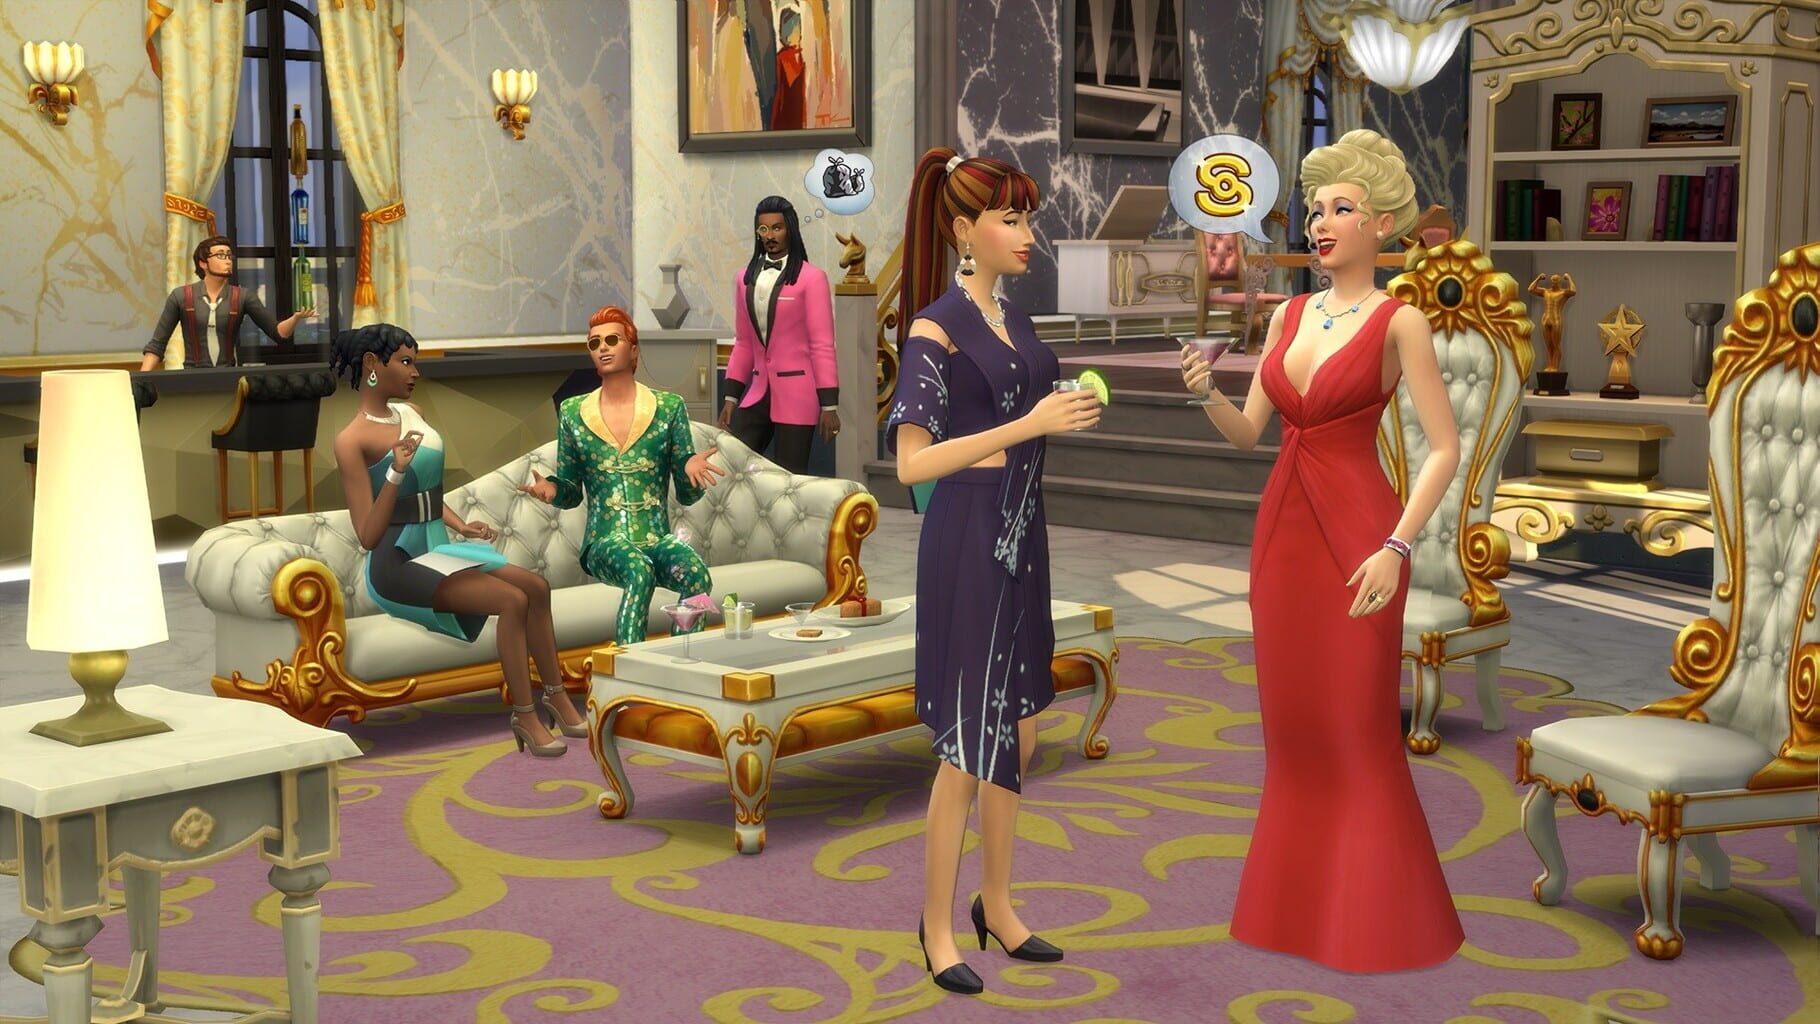 The Sims 4: Get Famous Image